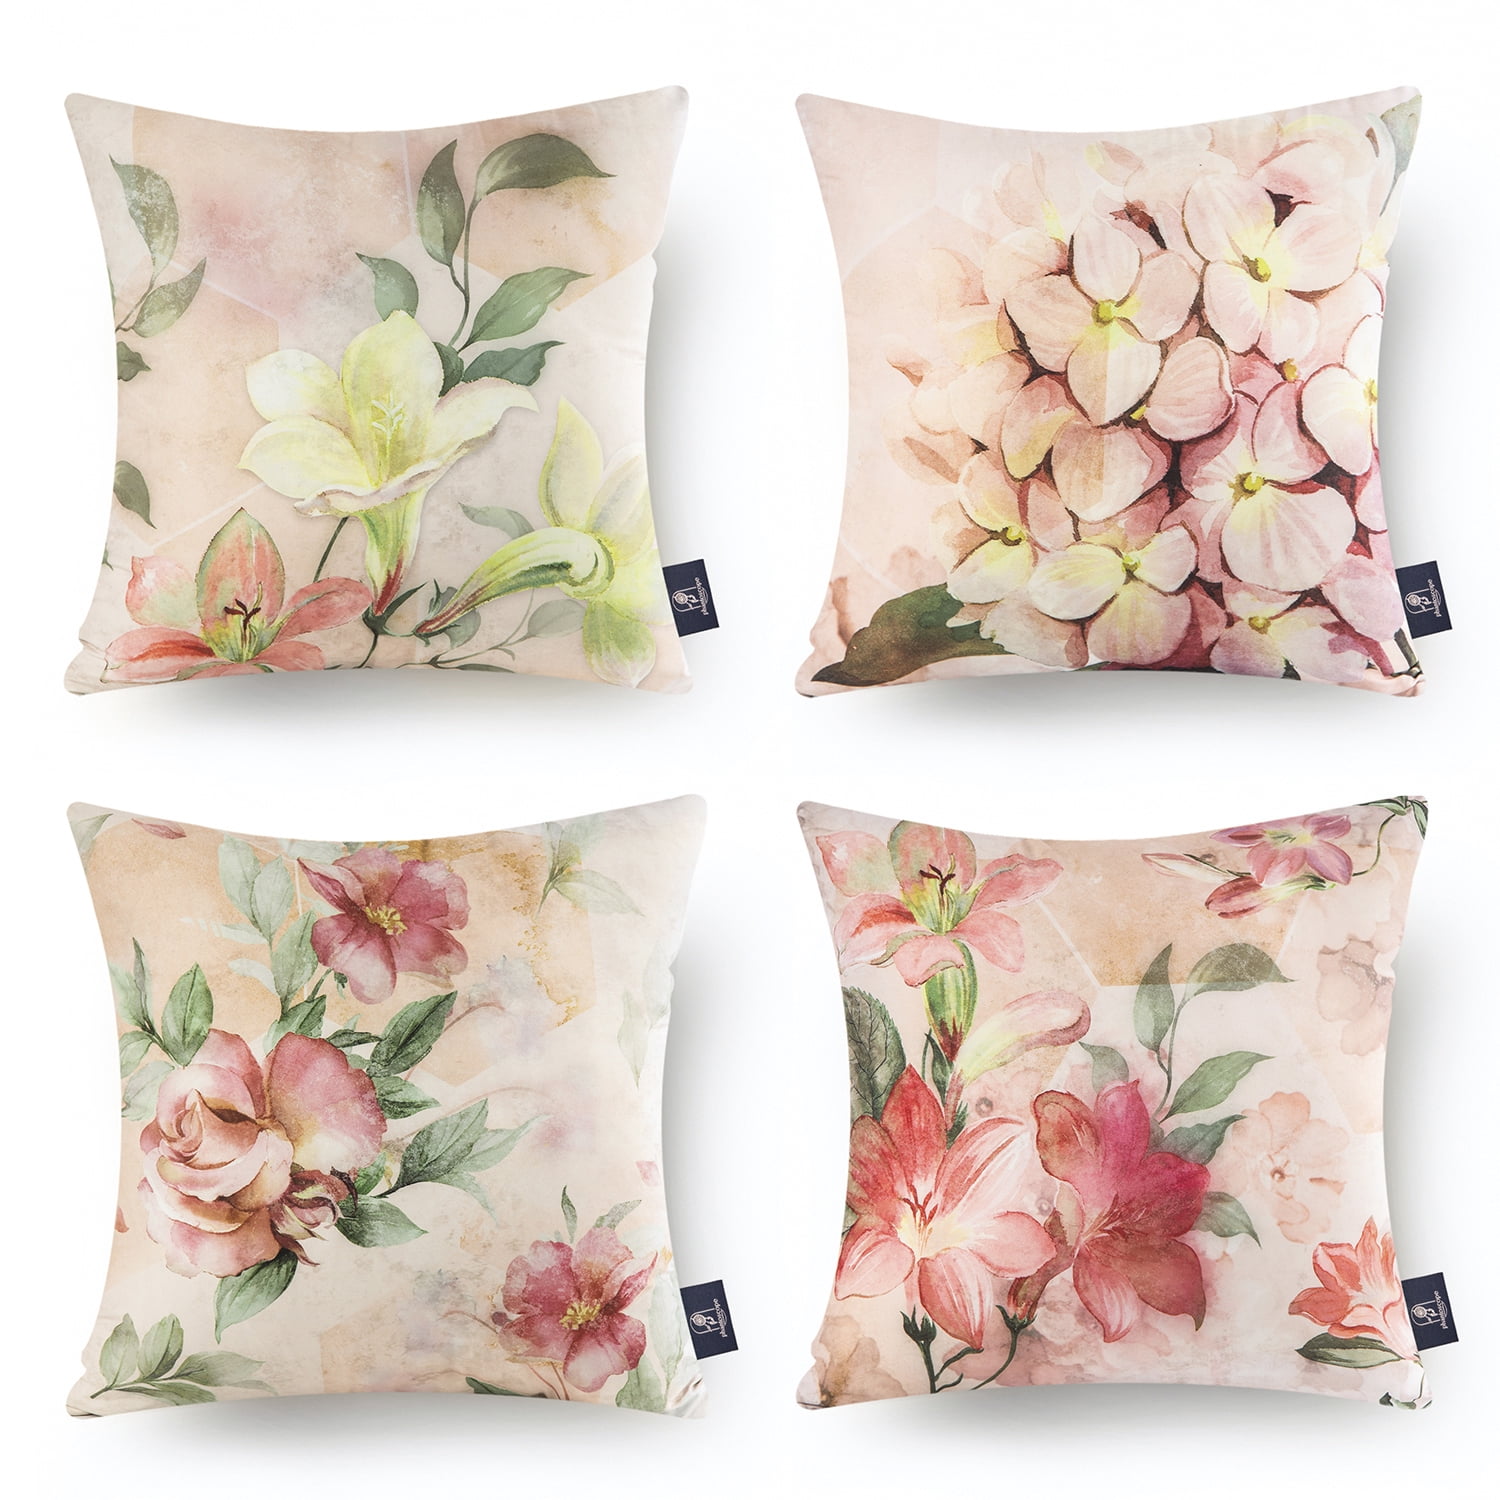 Flowers and Plants Throw Pillow Covers, Jungle Animal Decorative Cushion  Covers 18x18 16x16 20x20 24x24, Exotique Scenic Square Pillow Cases 